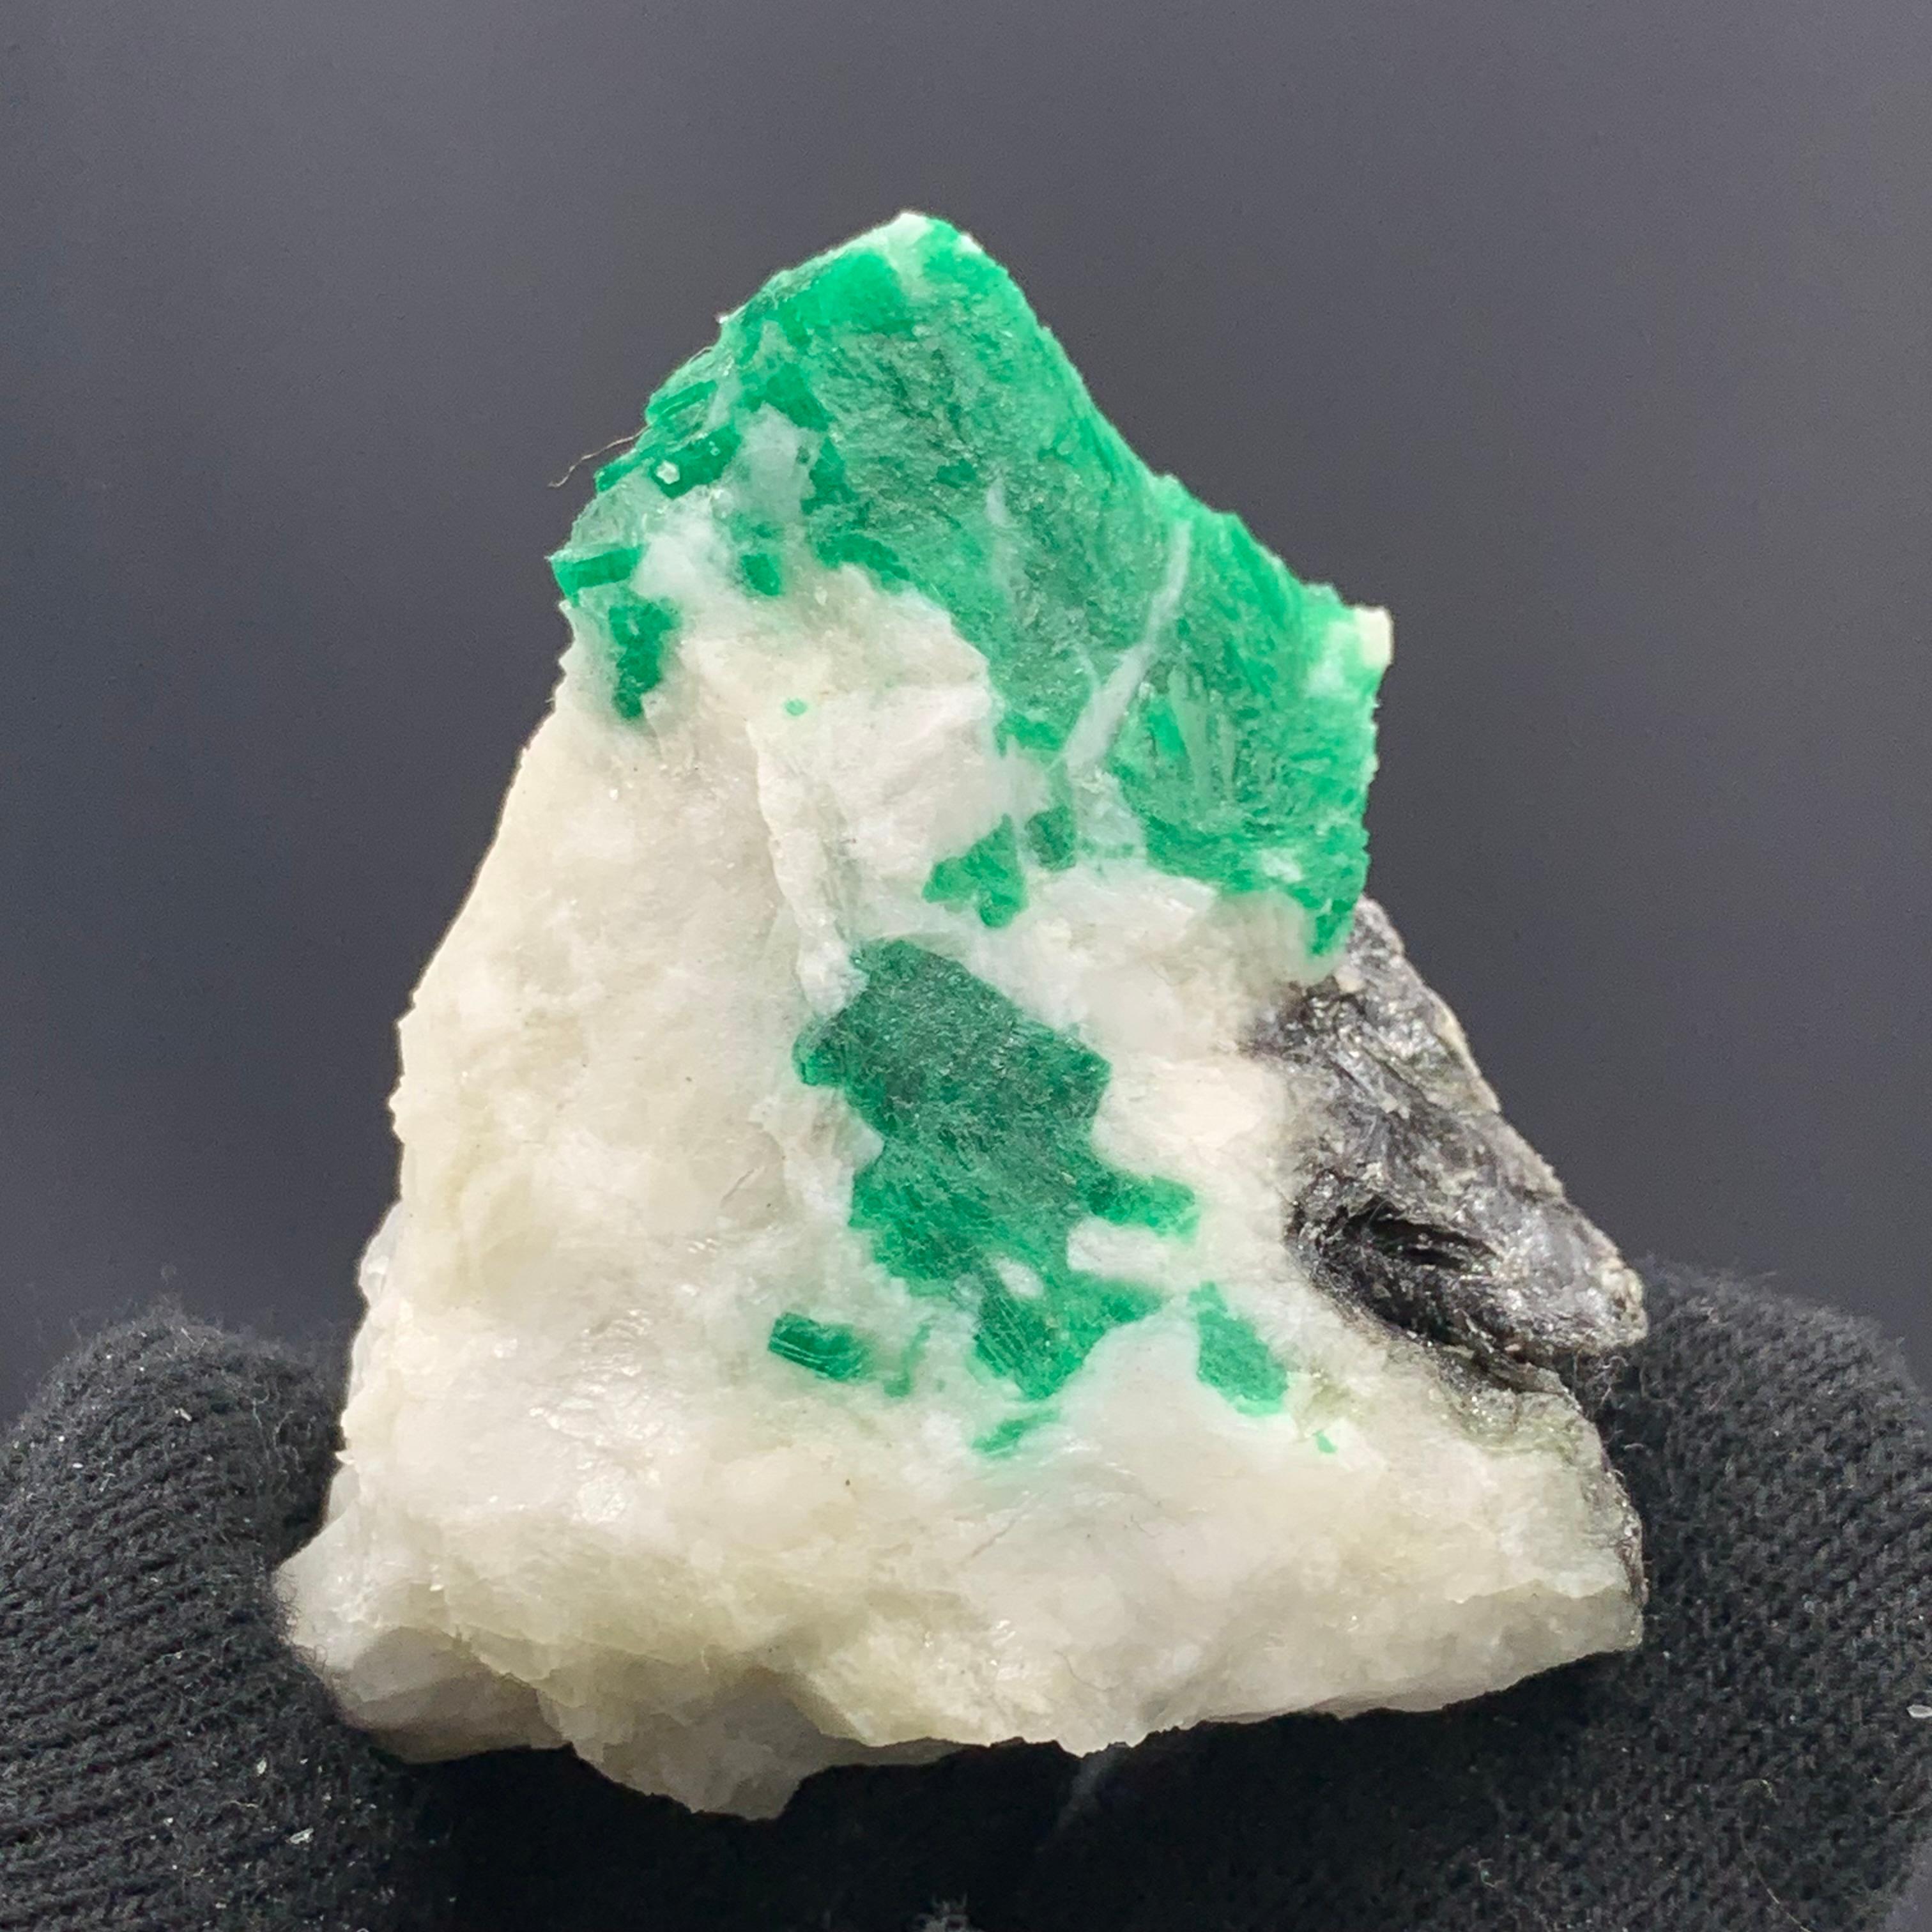 31.37 Gram Incredible Emerald Specimen From Swat Valley, Pakistan 

Weight: 31.37 Gram
Dimension: 4.5 x 4.1 x 1.5 Cm
Origin: Swat Valley, khyber Pukhtunkhuwa Province, Pakistan 

Emerald has the chemical composition Be3Al2(SiO3)6 and is classified